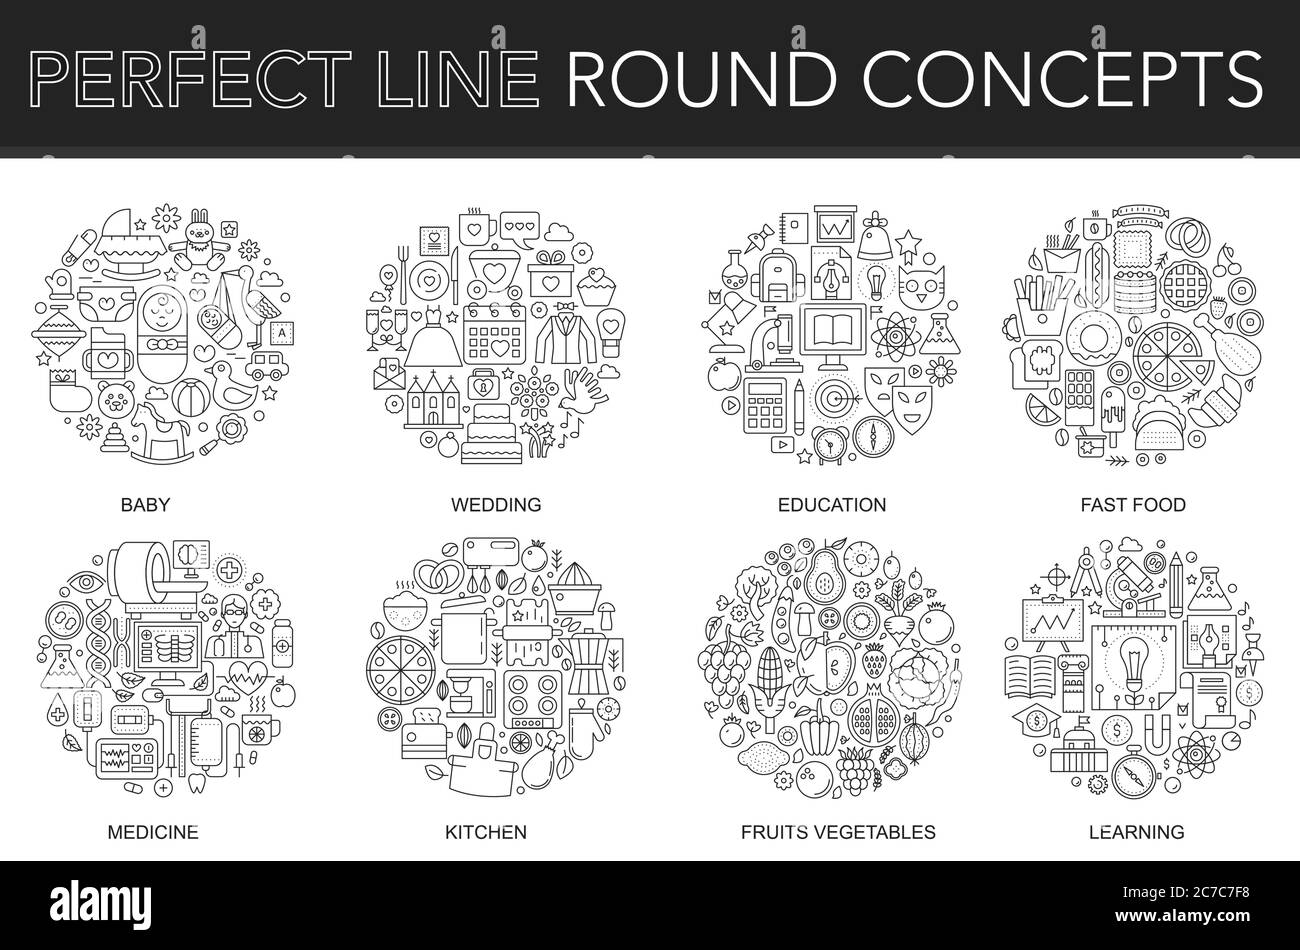 Round outline concept of baby, wedding, education, fast food, medicine, kitchen, fruits vegetables, learning. Thin line stroke vector icons set for cover, emblem, badge, flyers and posters Stock Vector